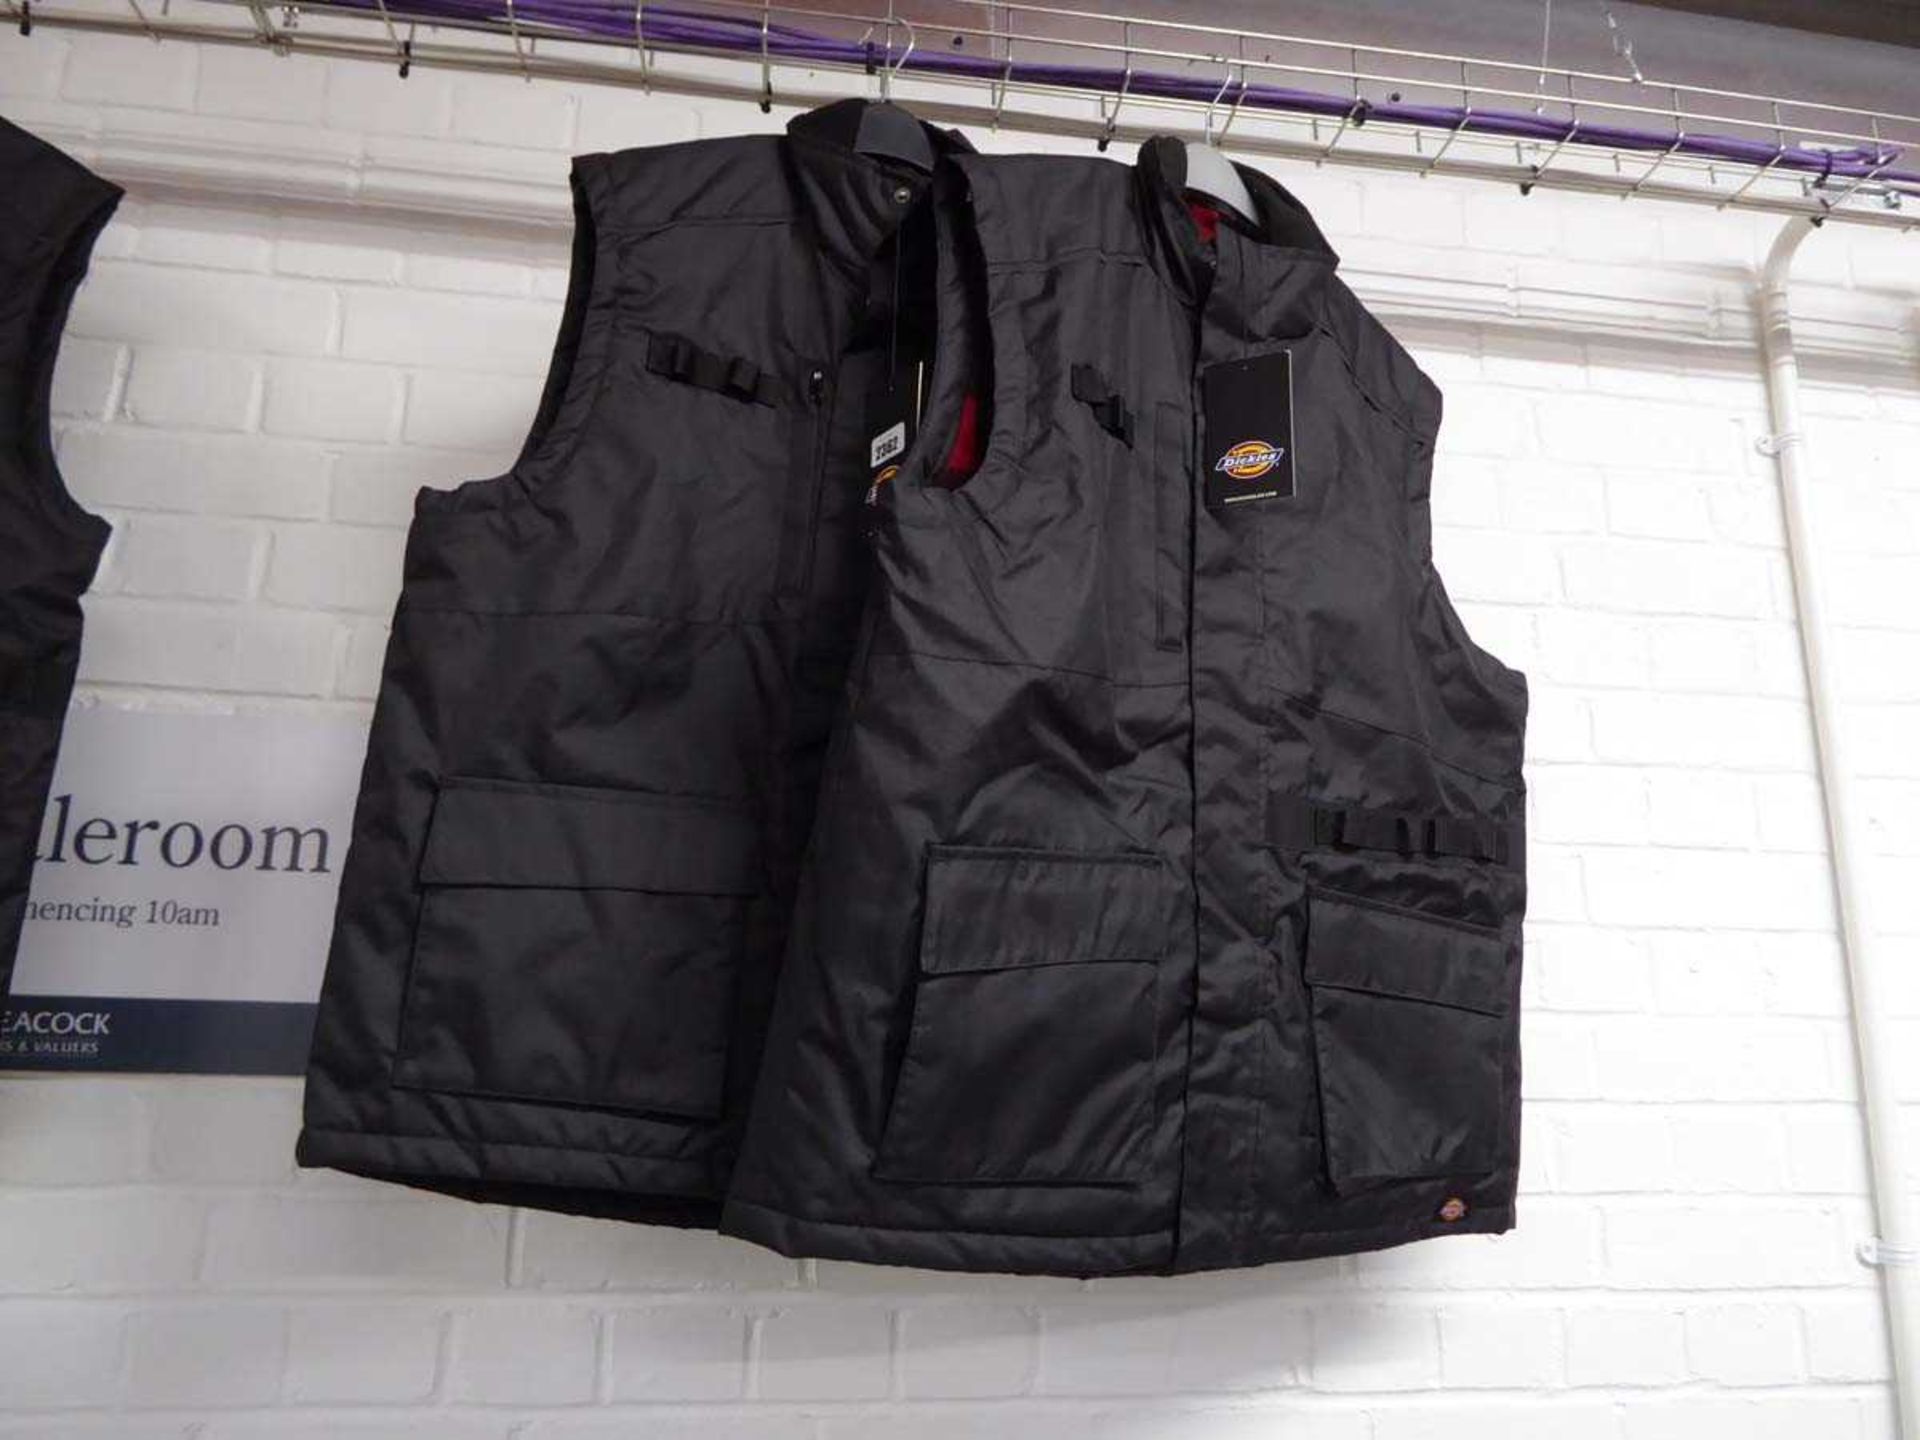 2 Dickies work gilets in black (sizes XL and XXL)